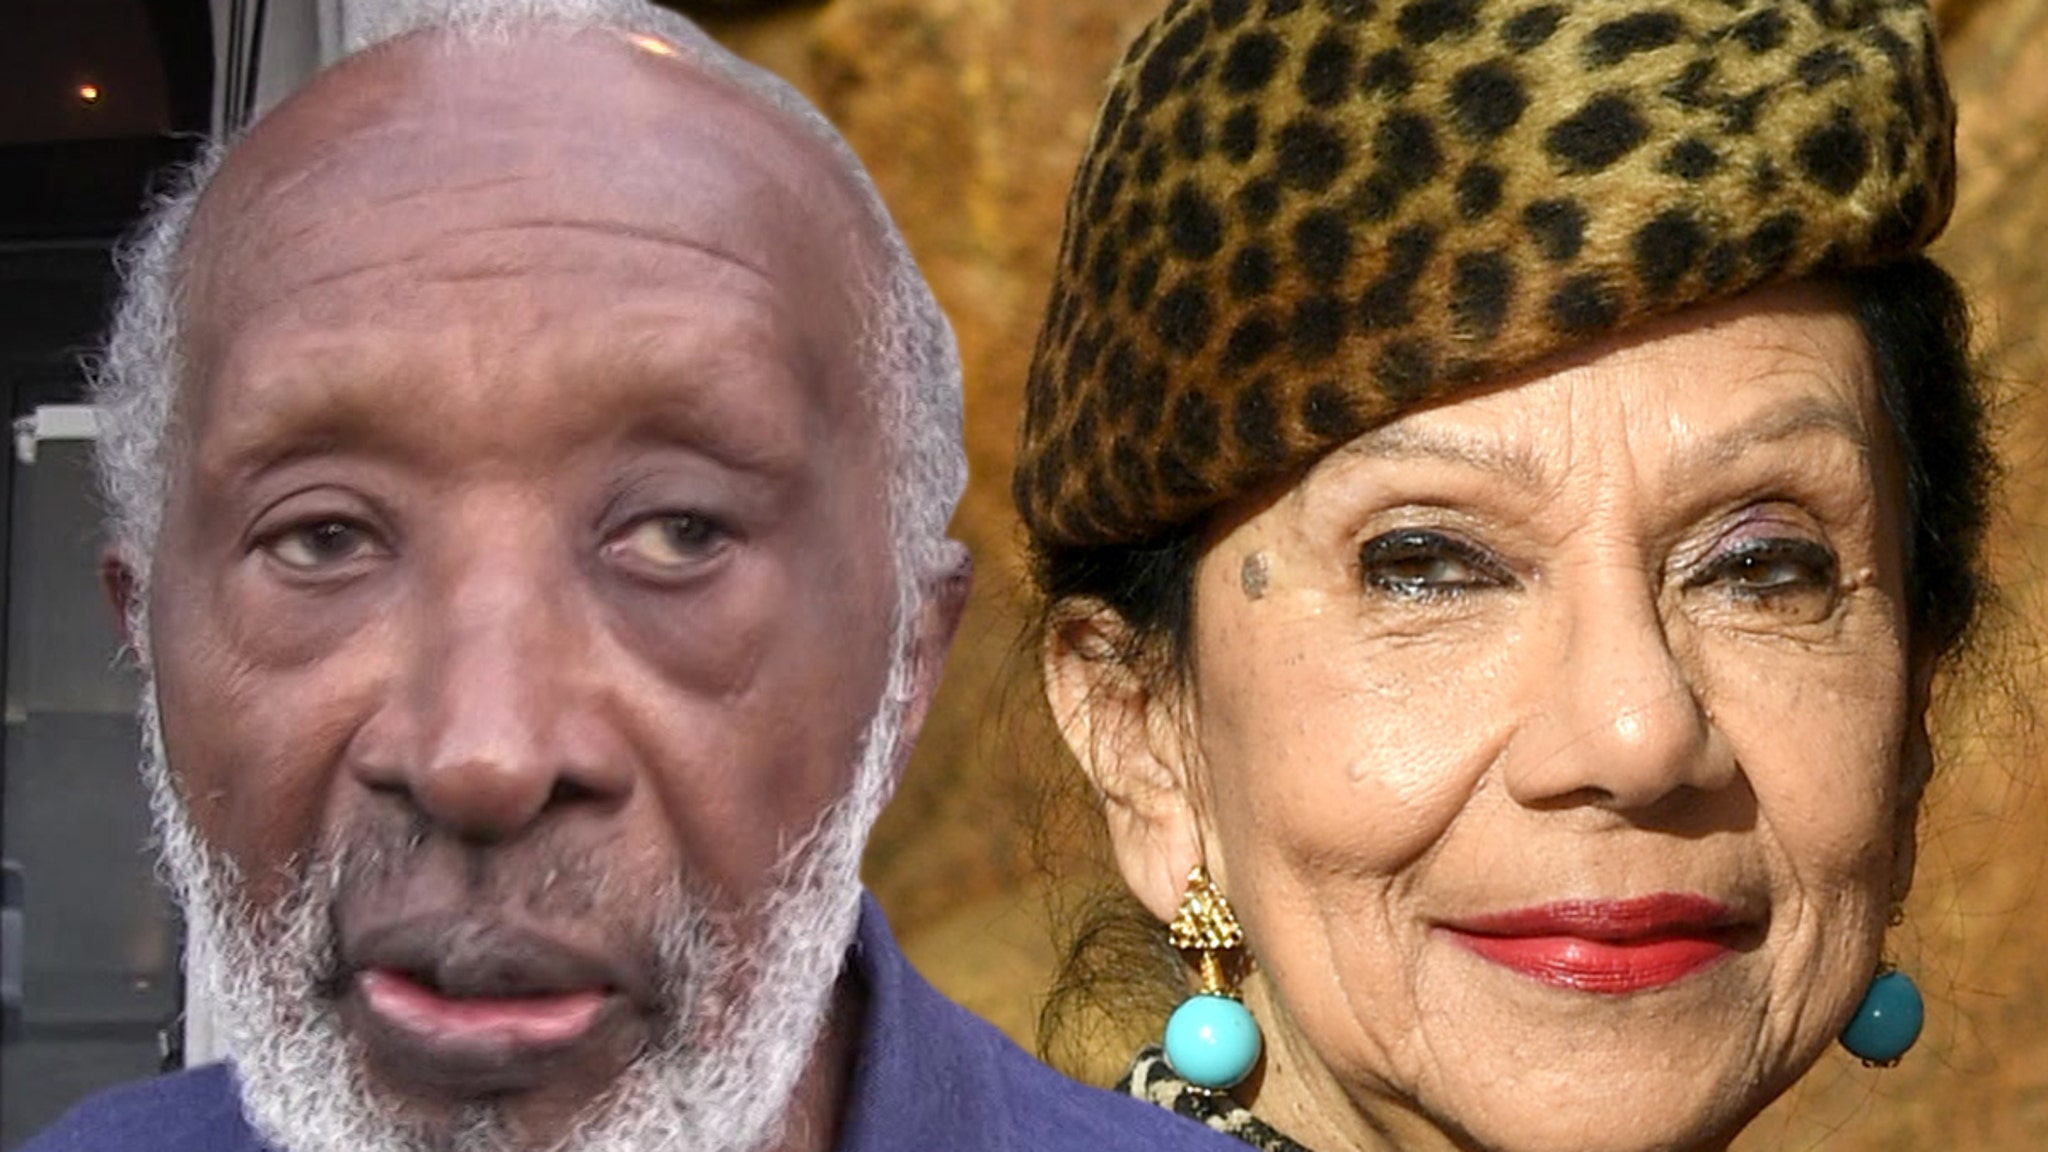 Clarence and Jackie Avant’s Neighbors Hire Armed Security After Murder